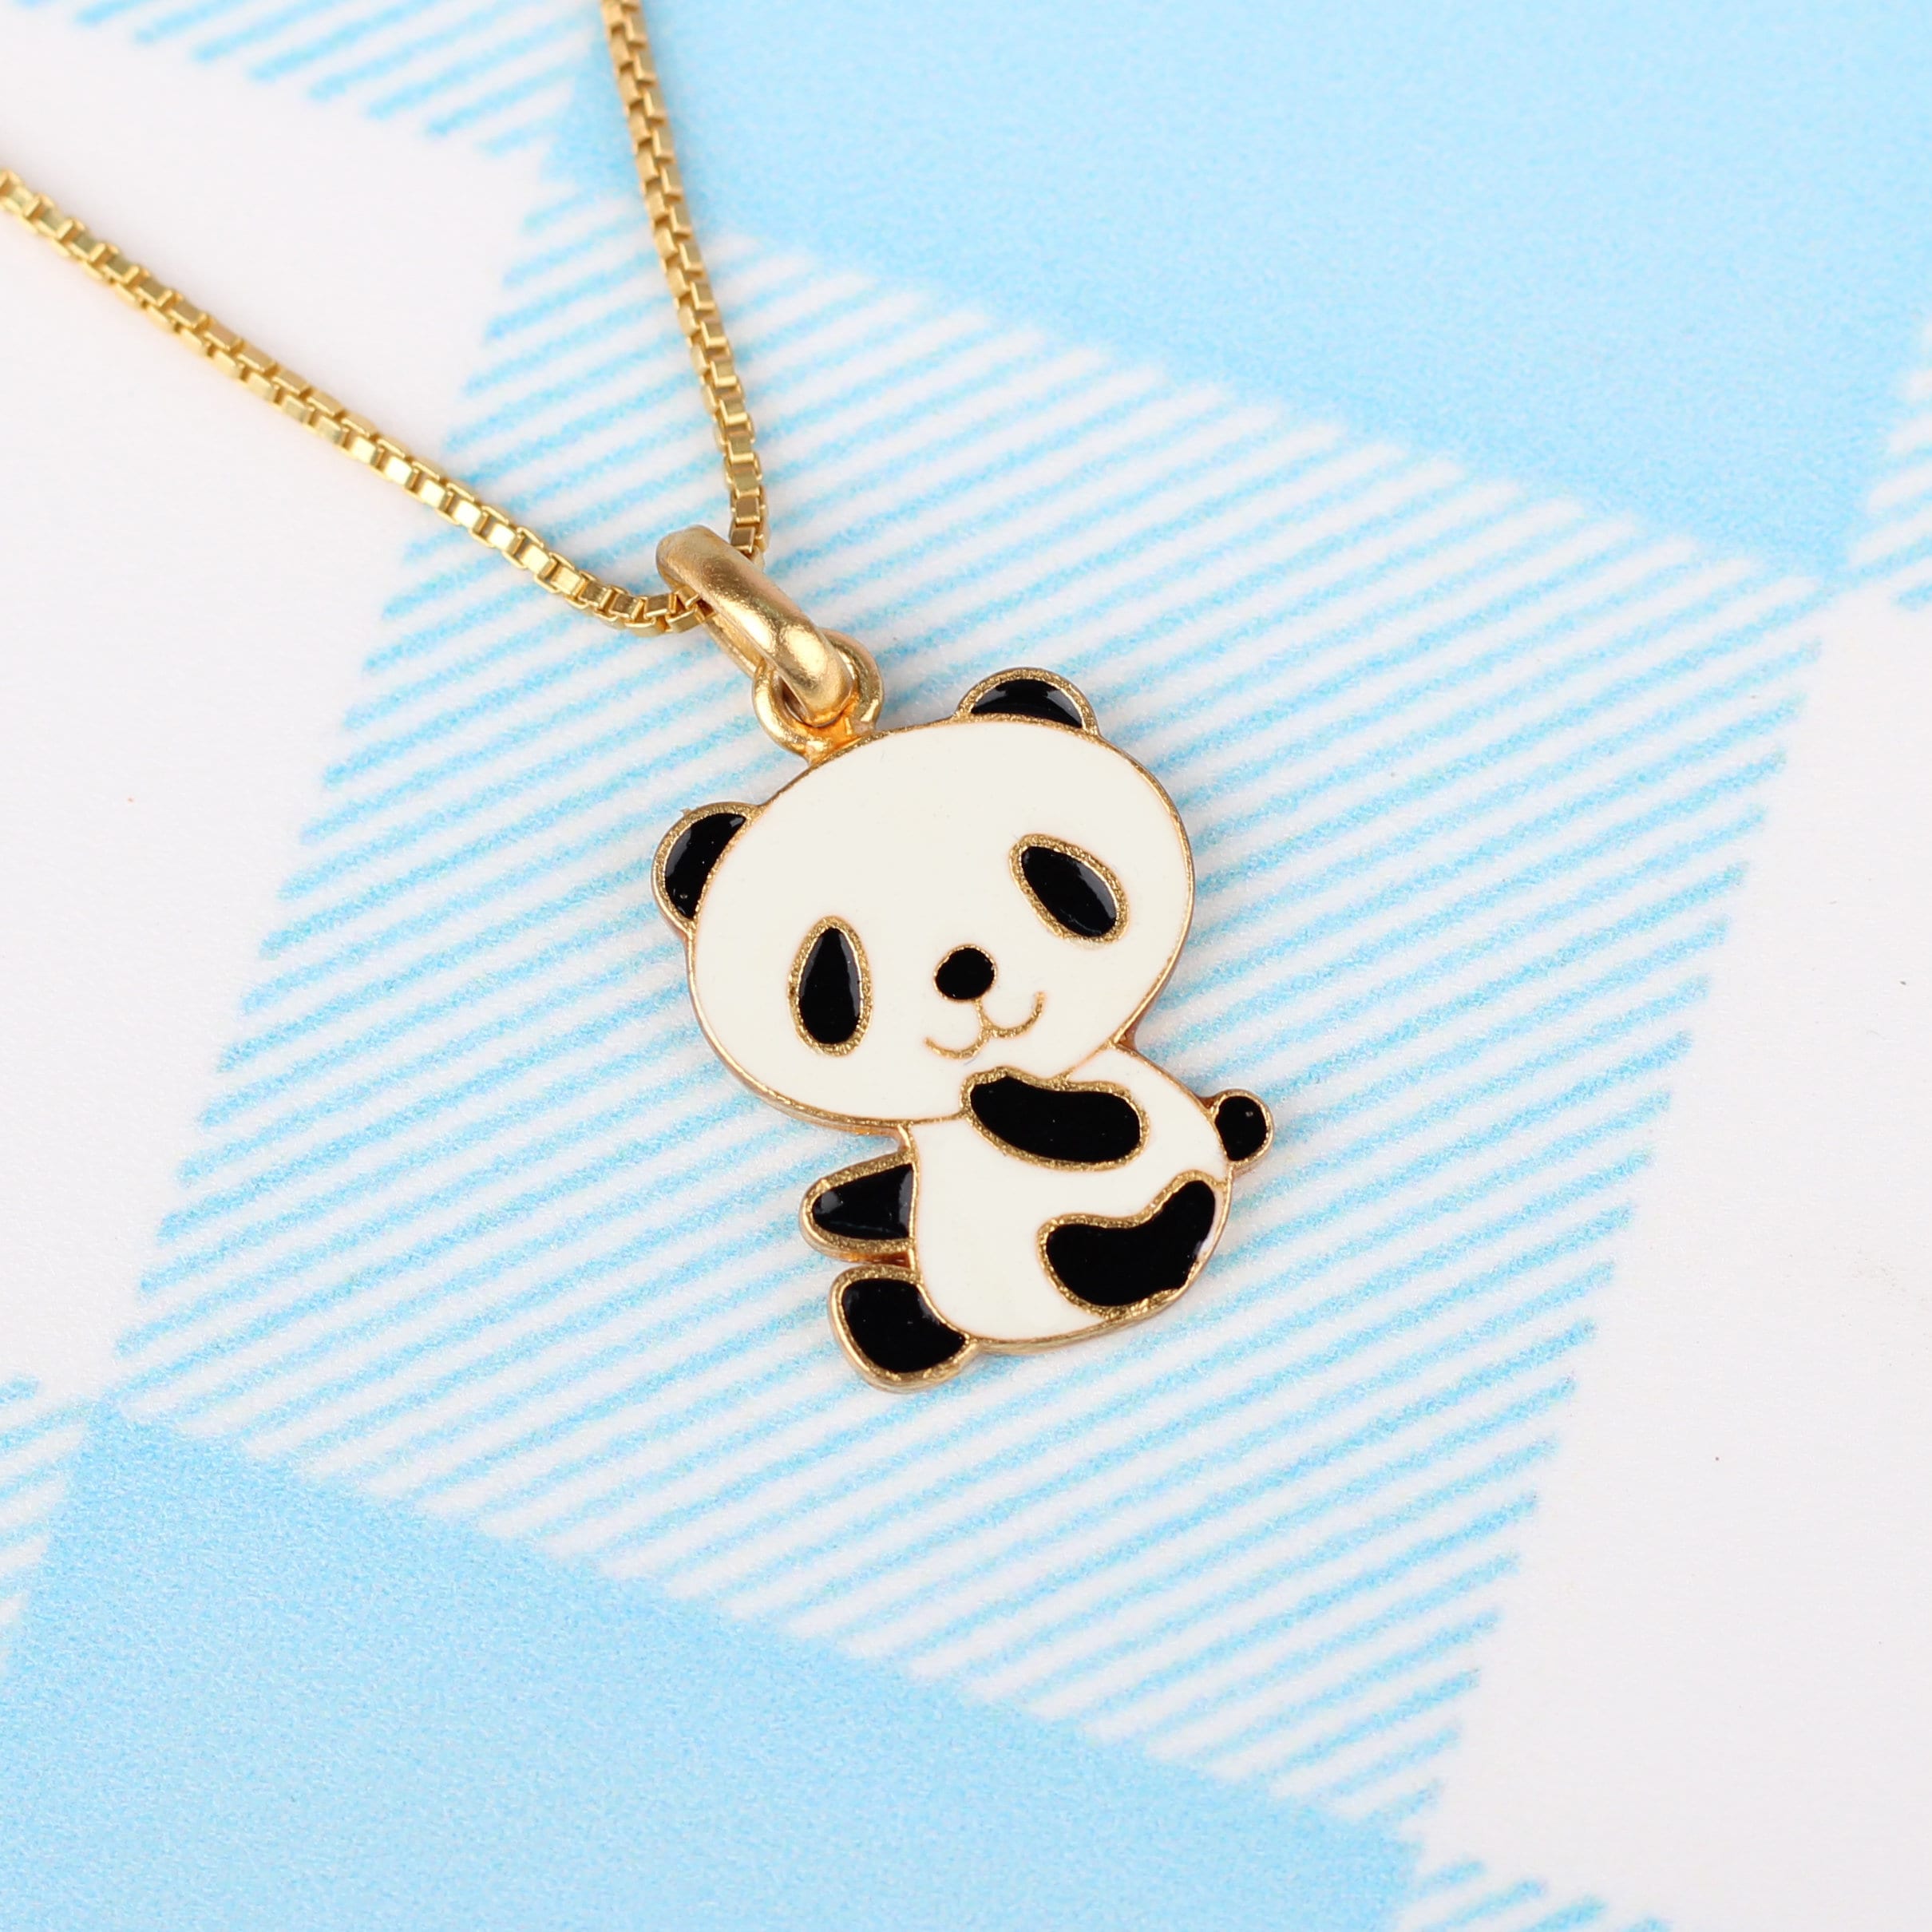 Gold Panda Necklace, 14K, Chain Necklace, Gold Chain, Animal Lover,  Everyday Jewelry, Gift for Her, Real Gold, Good Luck, Peace, Layering - Etsy